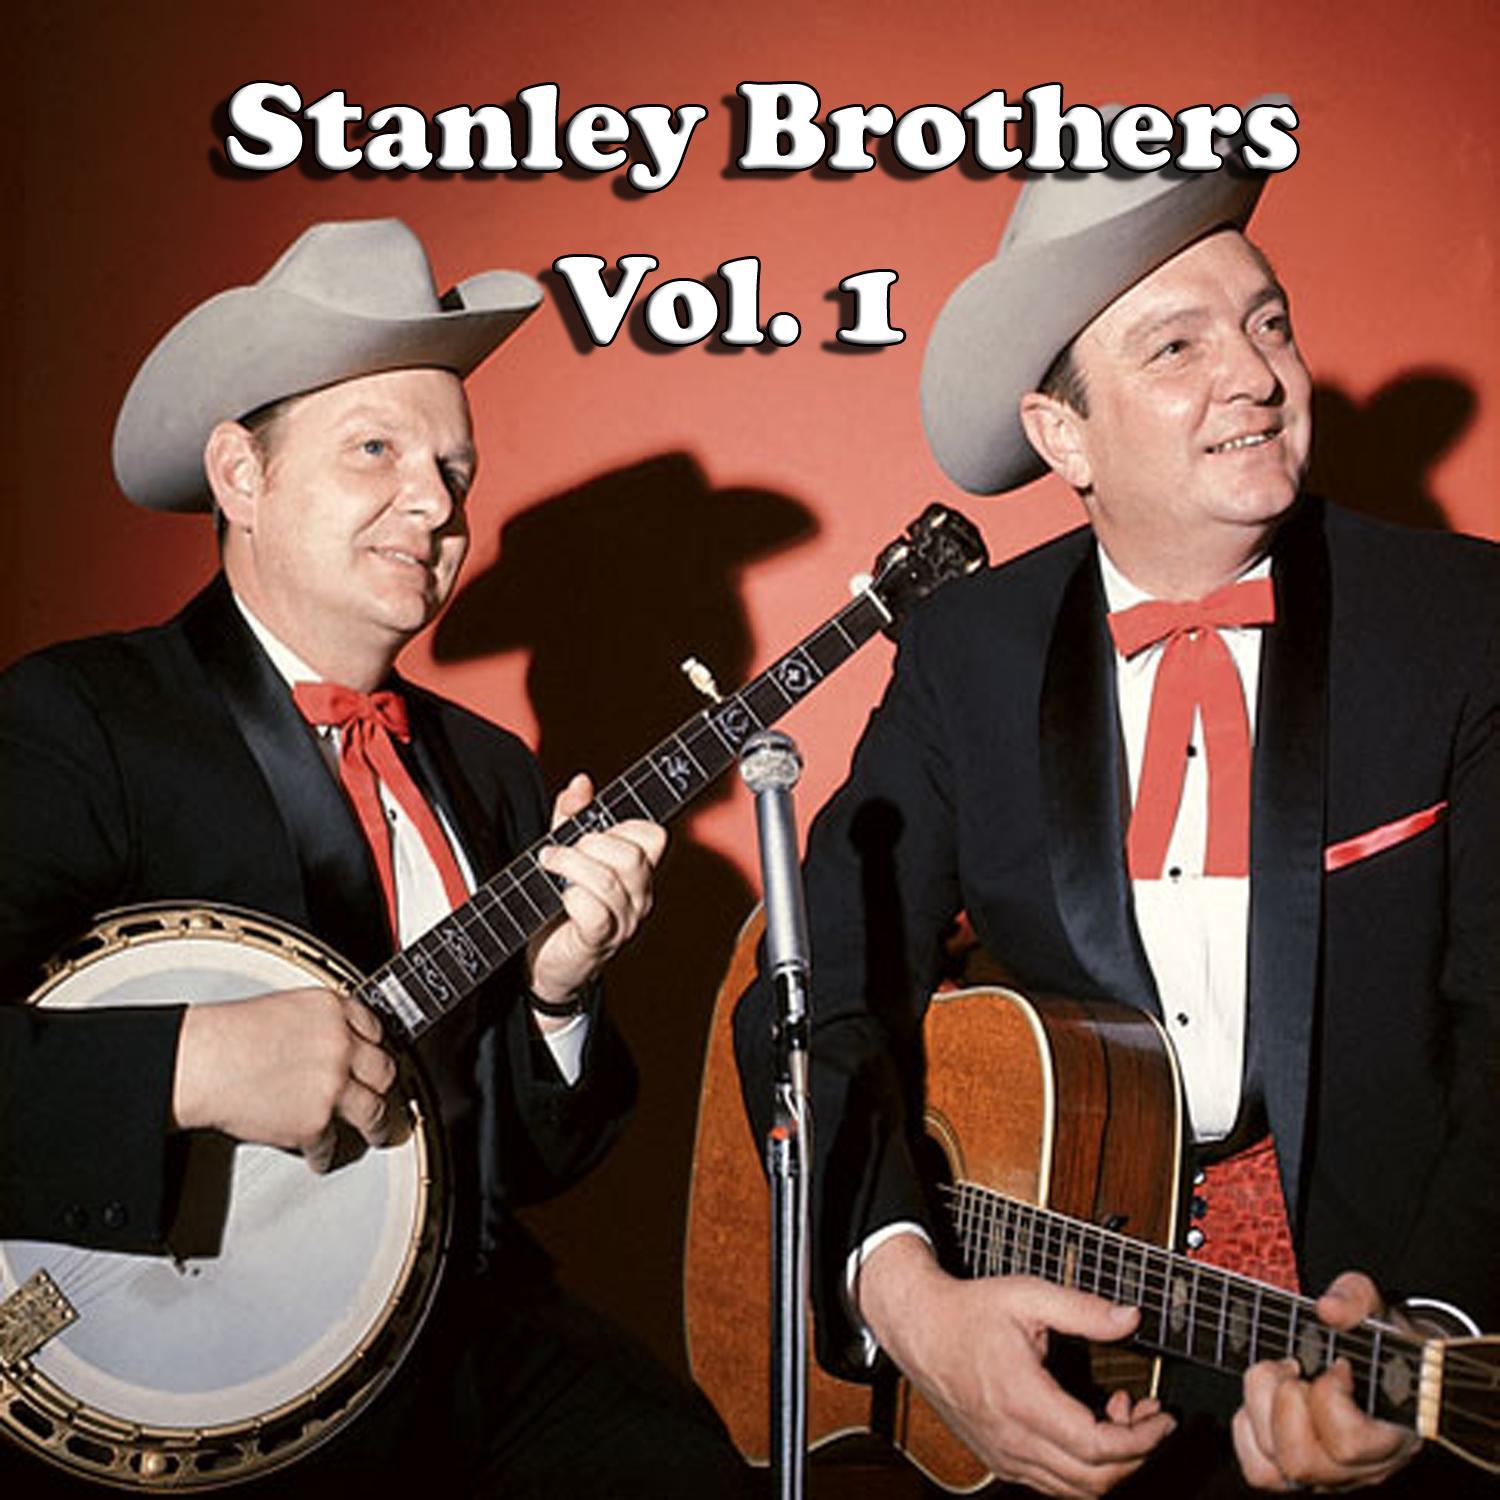 Stanley Brothers, Vol. 1